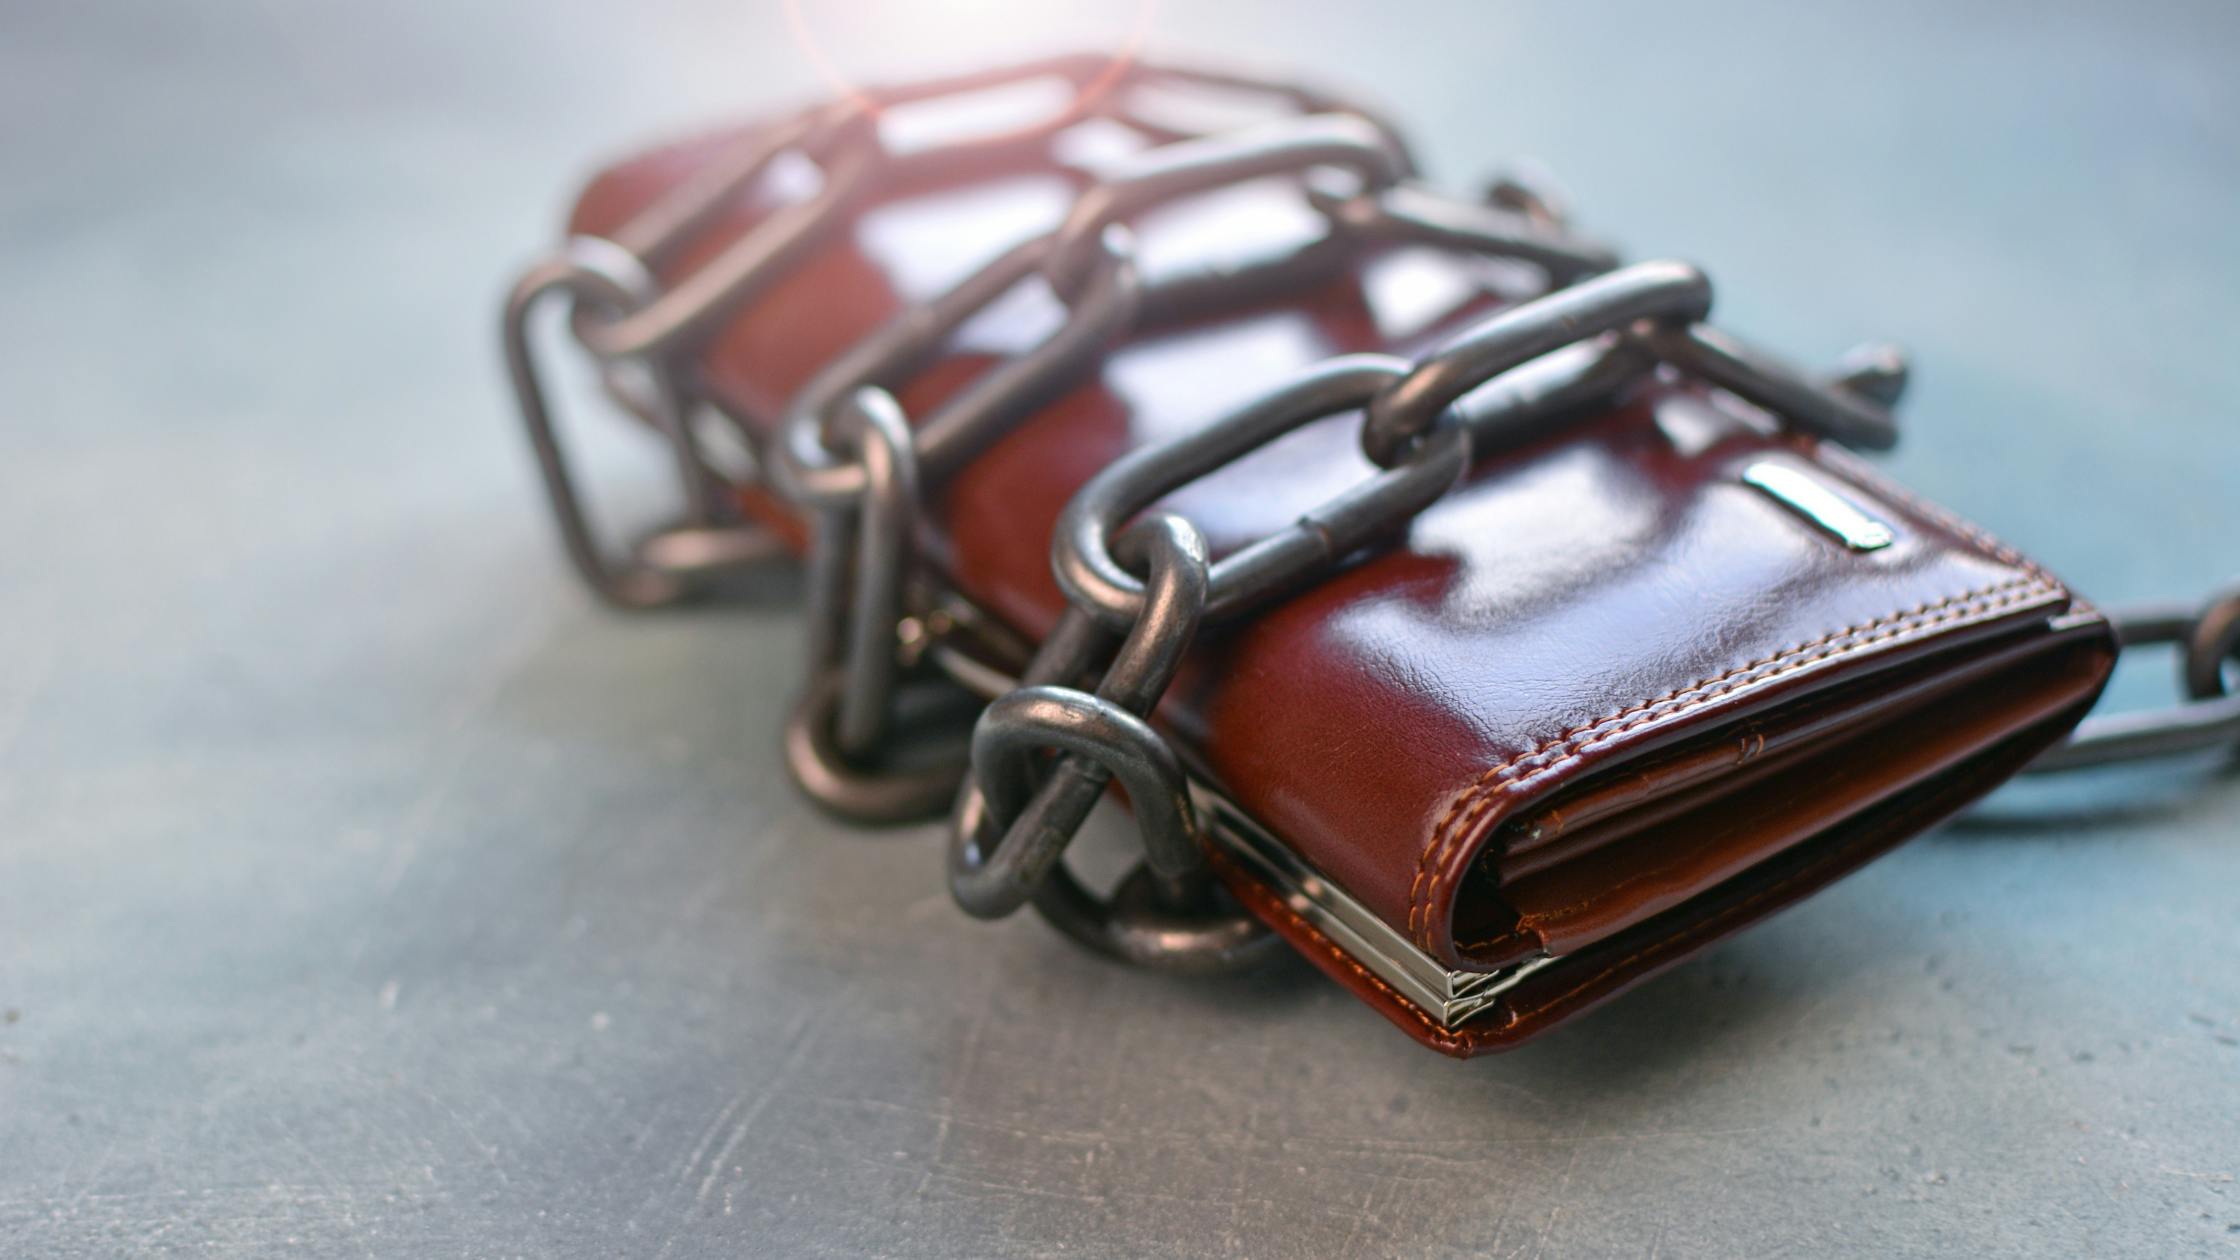 A leather wallet sits on a counter, with chain wrapped around it, preventing anyone from opening the wallet